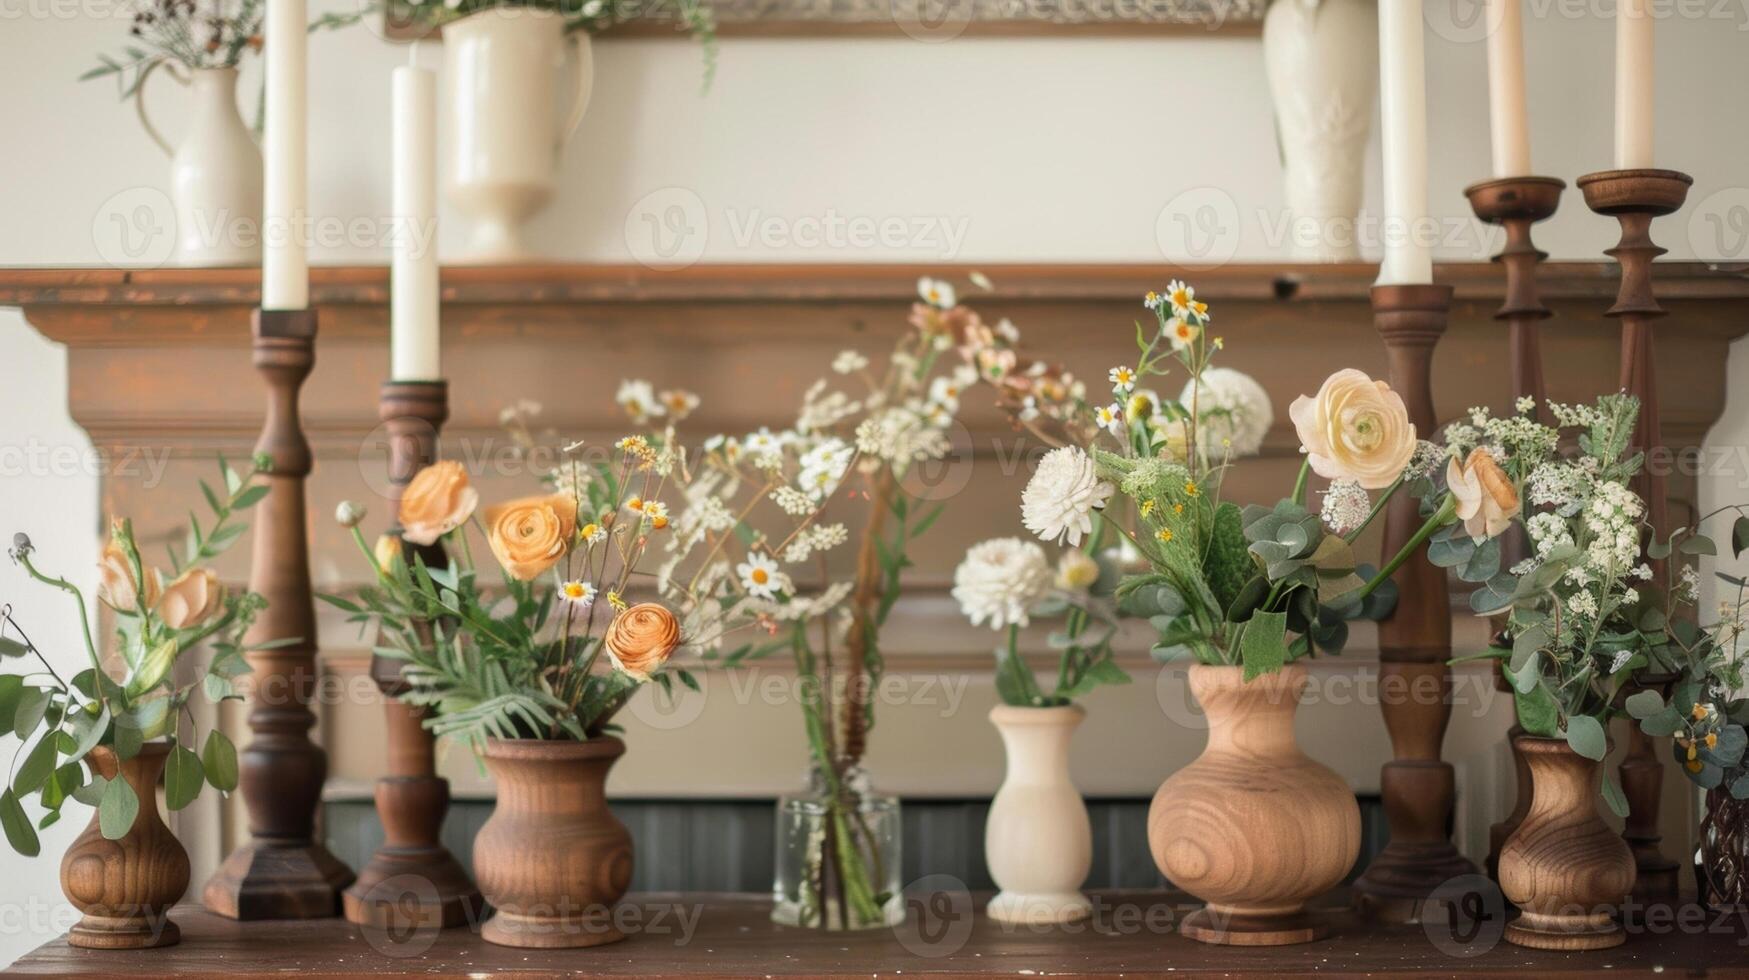 Wooden candlesticks and vases of freshly picked flowers decorate the mantel bringing touches of nature into the room. 2d flat cartoon photo